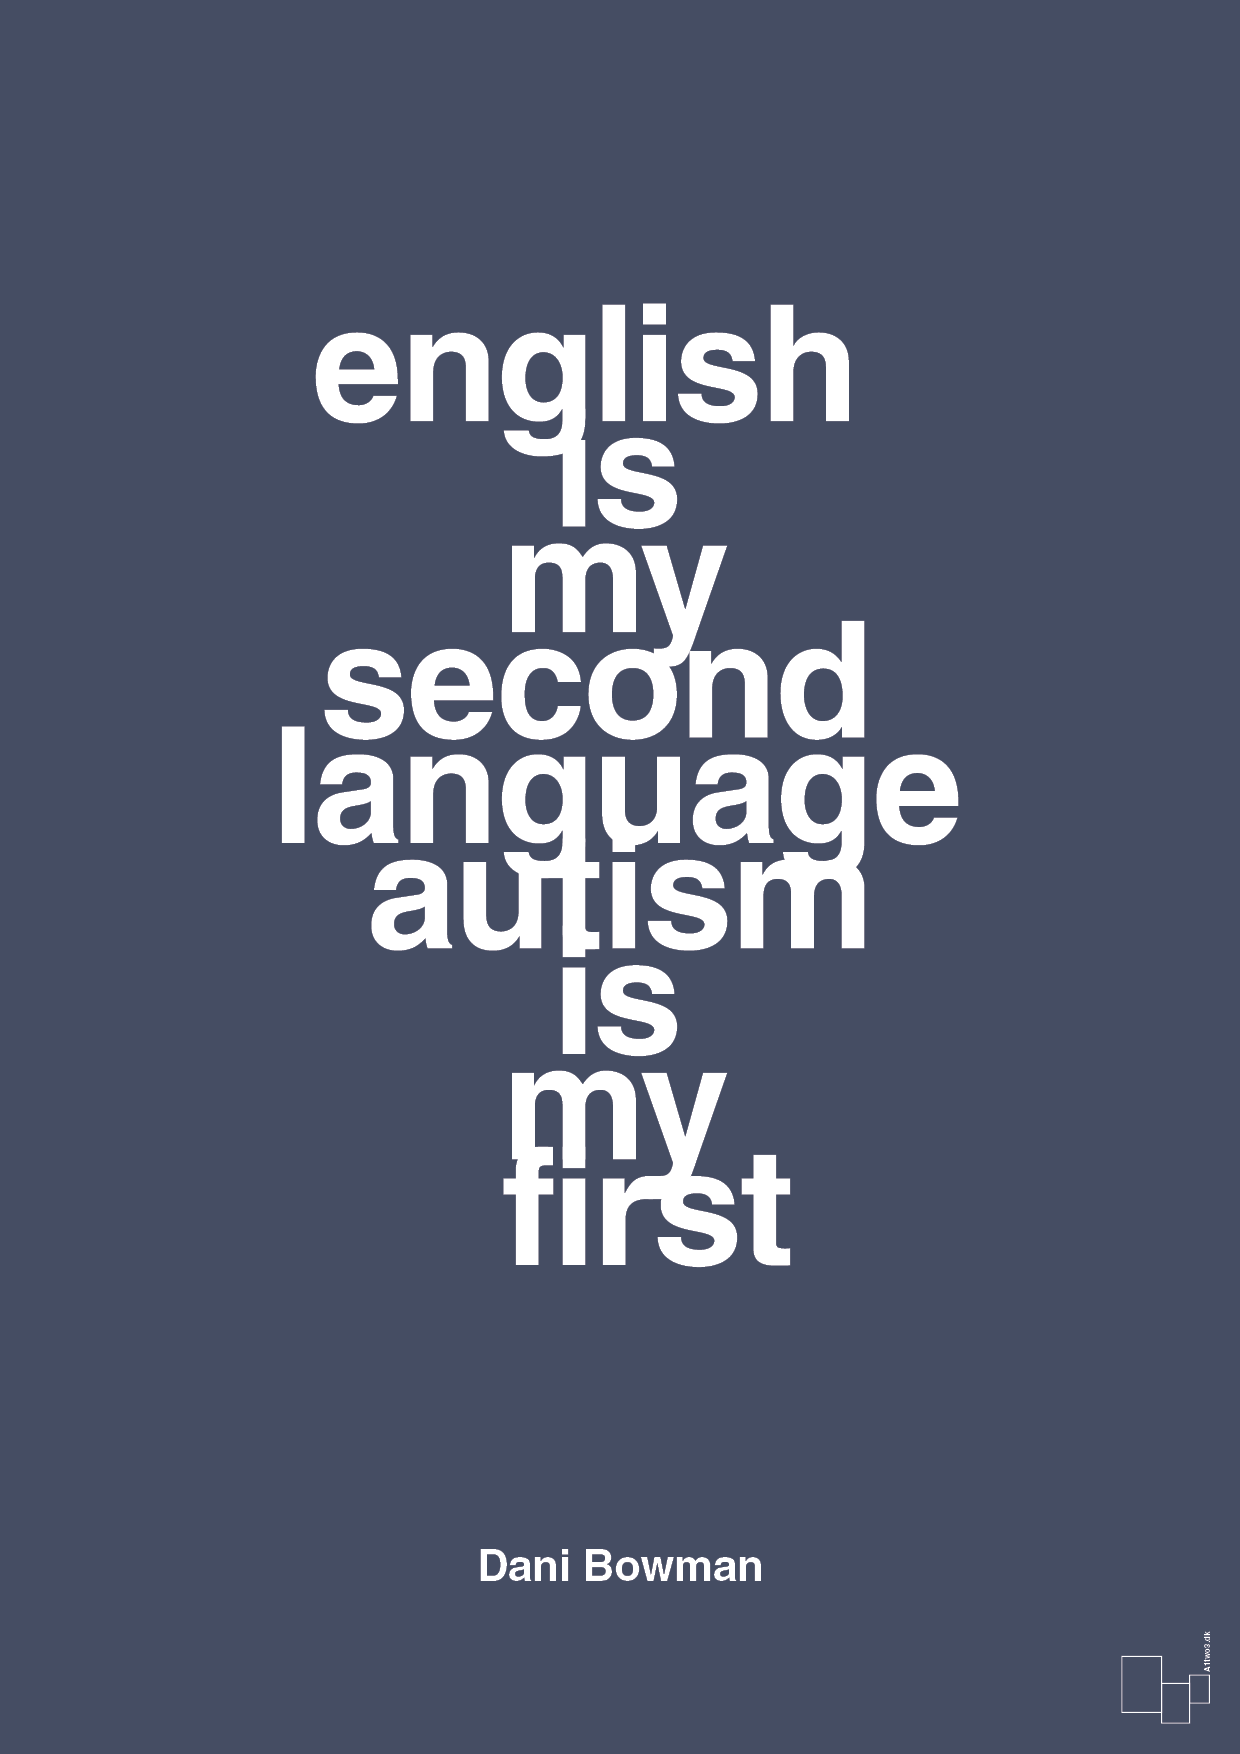 english is my second language autism is my first - Plakat med Samfund i Petrol